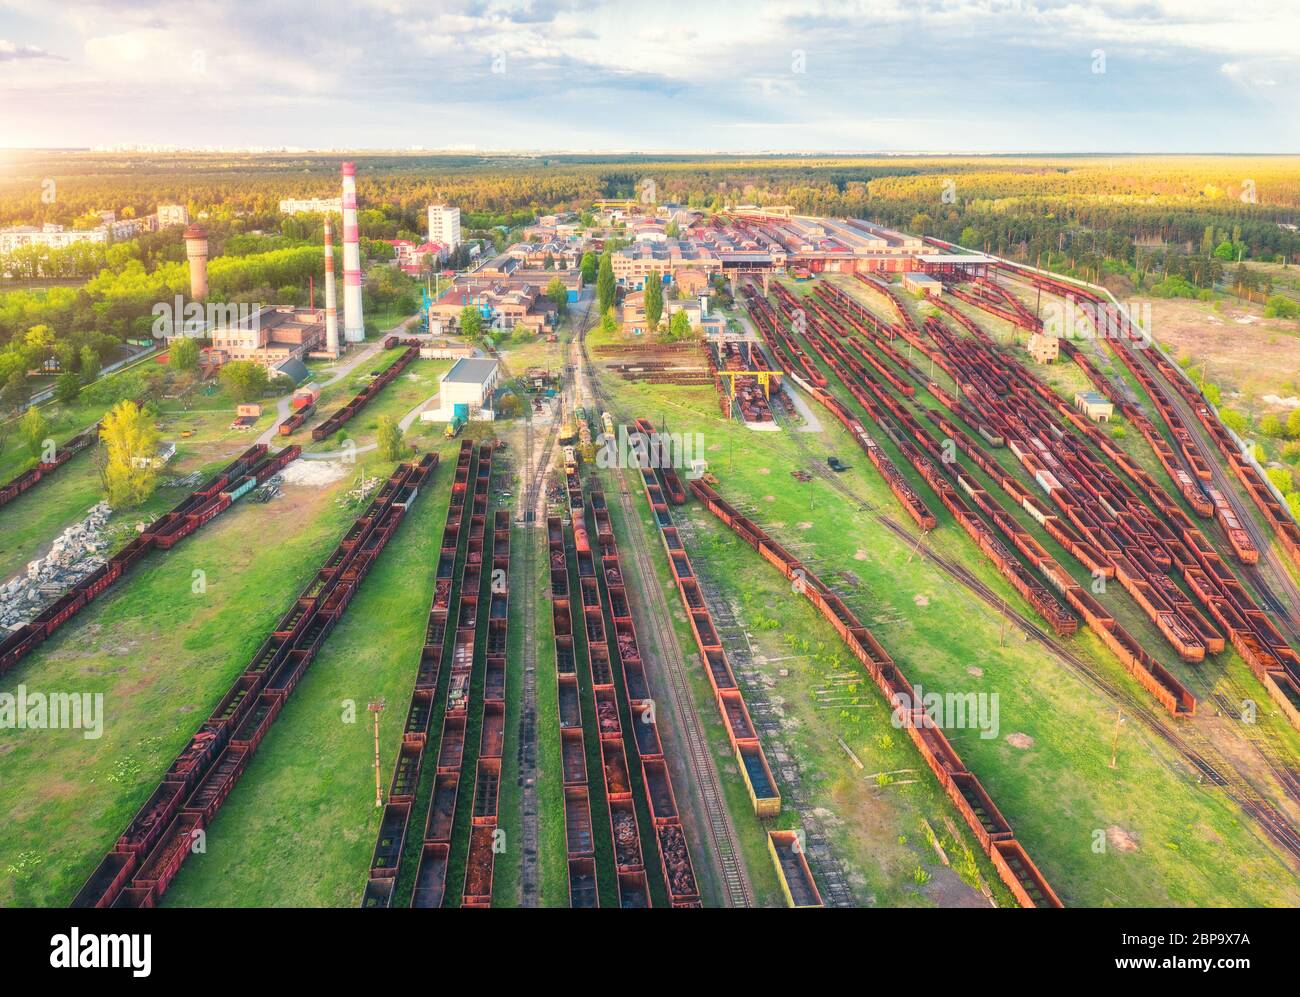 Aerial view of colorful freight trains. Railway station Stock Photo